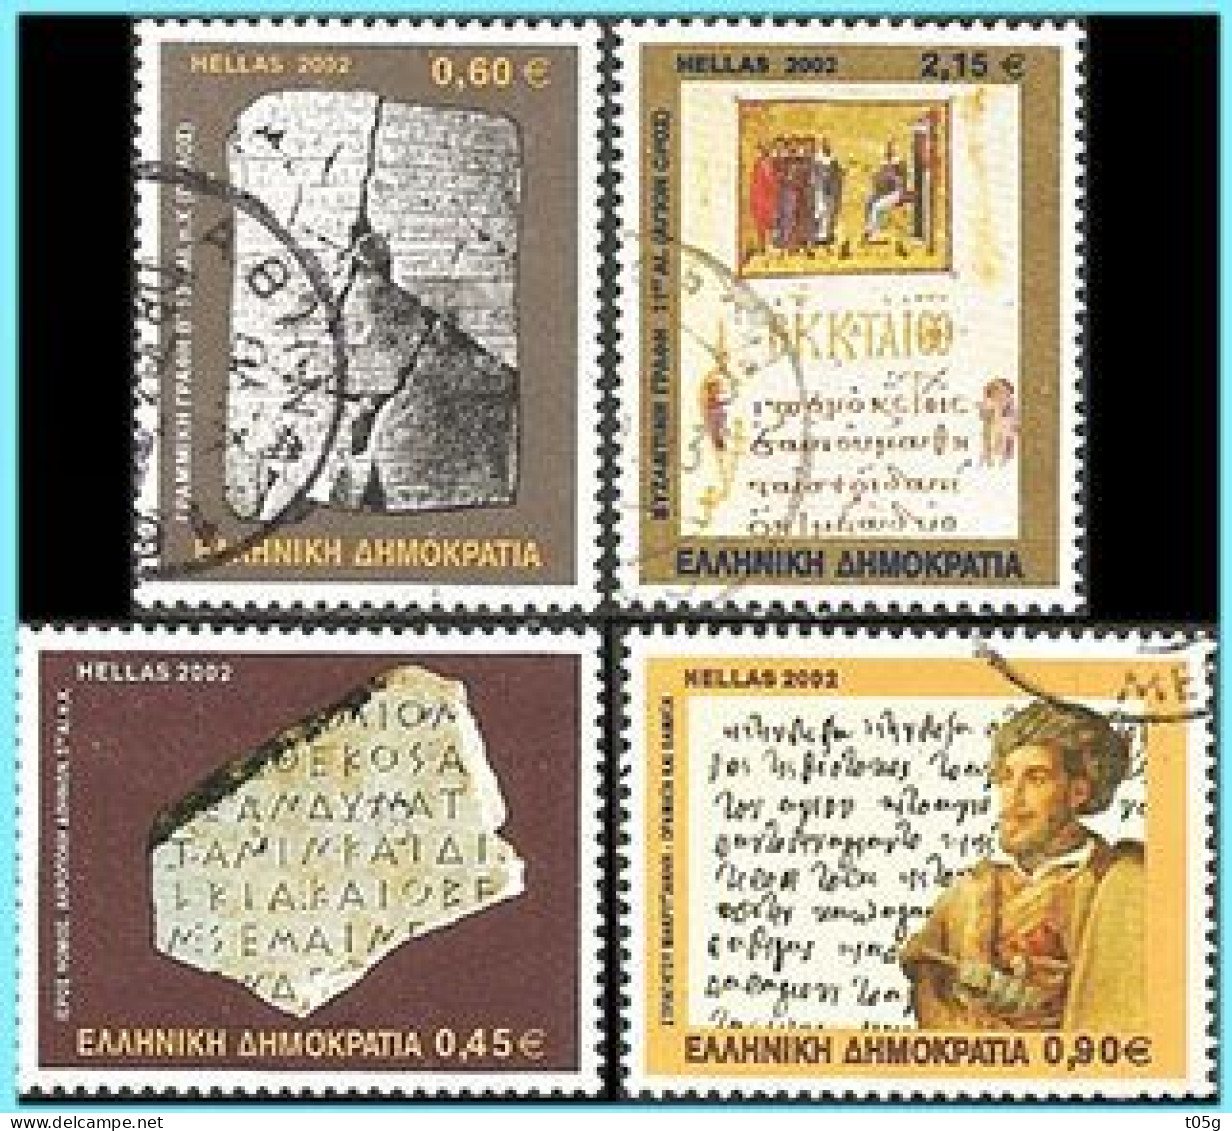 GREECE- GRECE - HELLAS 2002: Compl. Set Used - Used Stamps